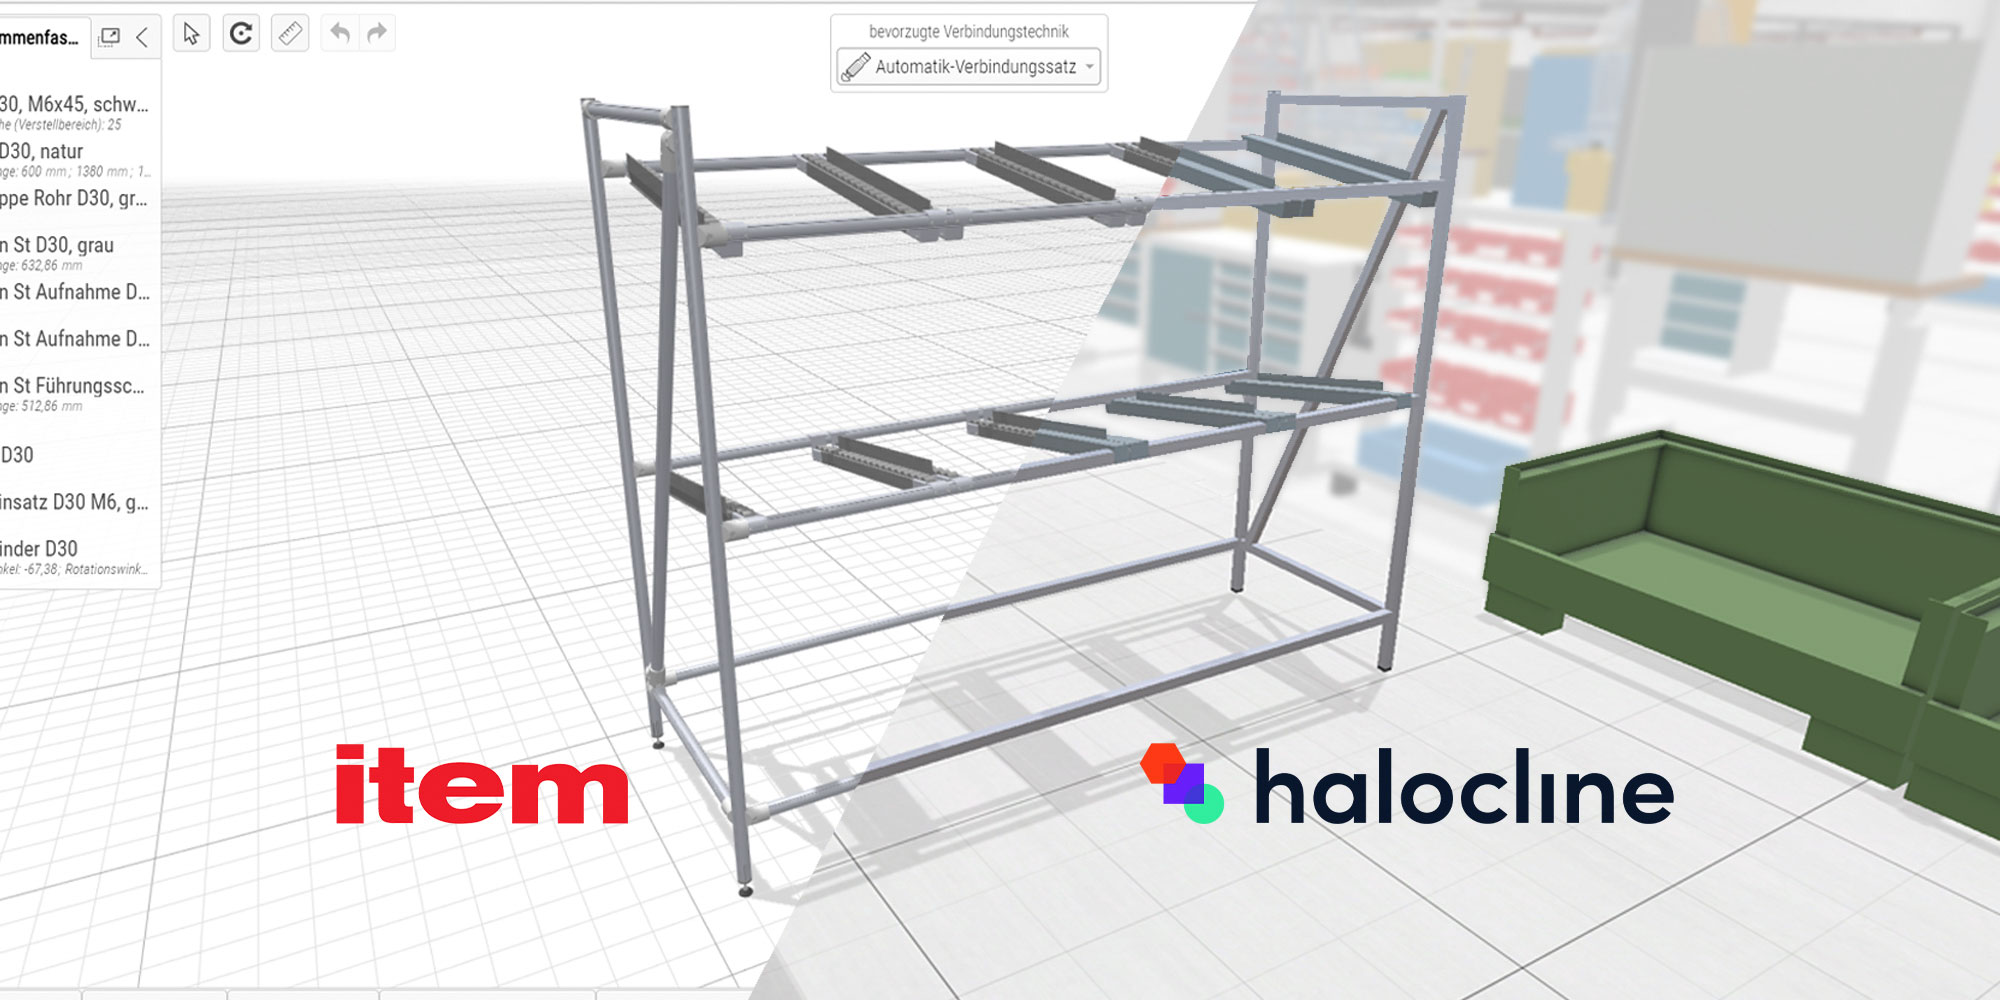 Virtual reality in industry – production planning with Halocline